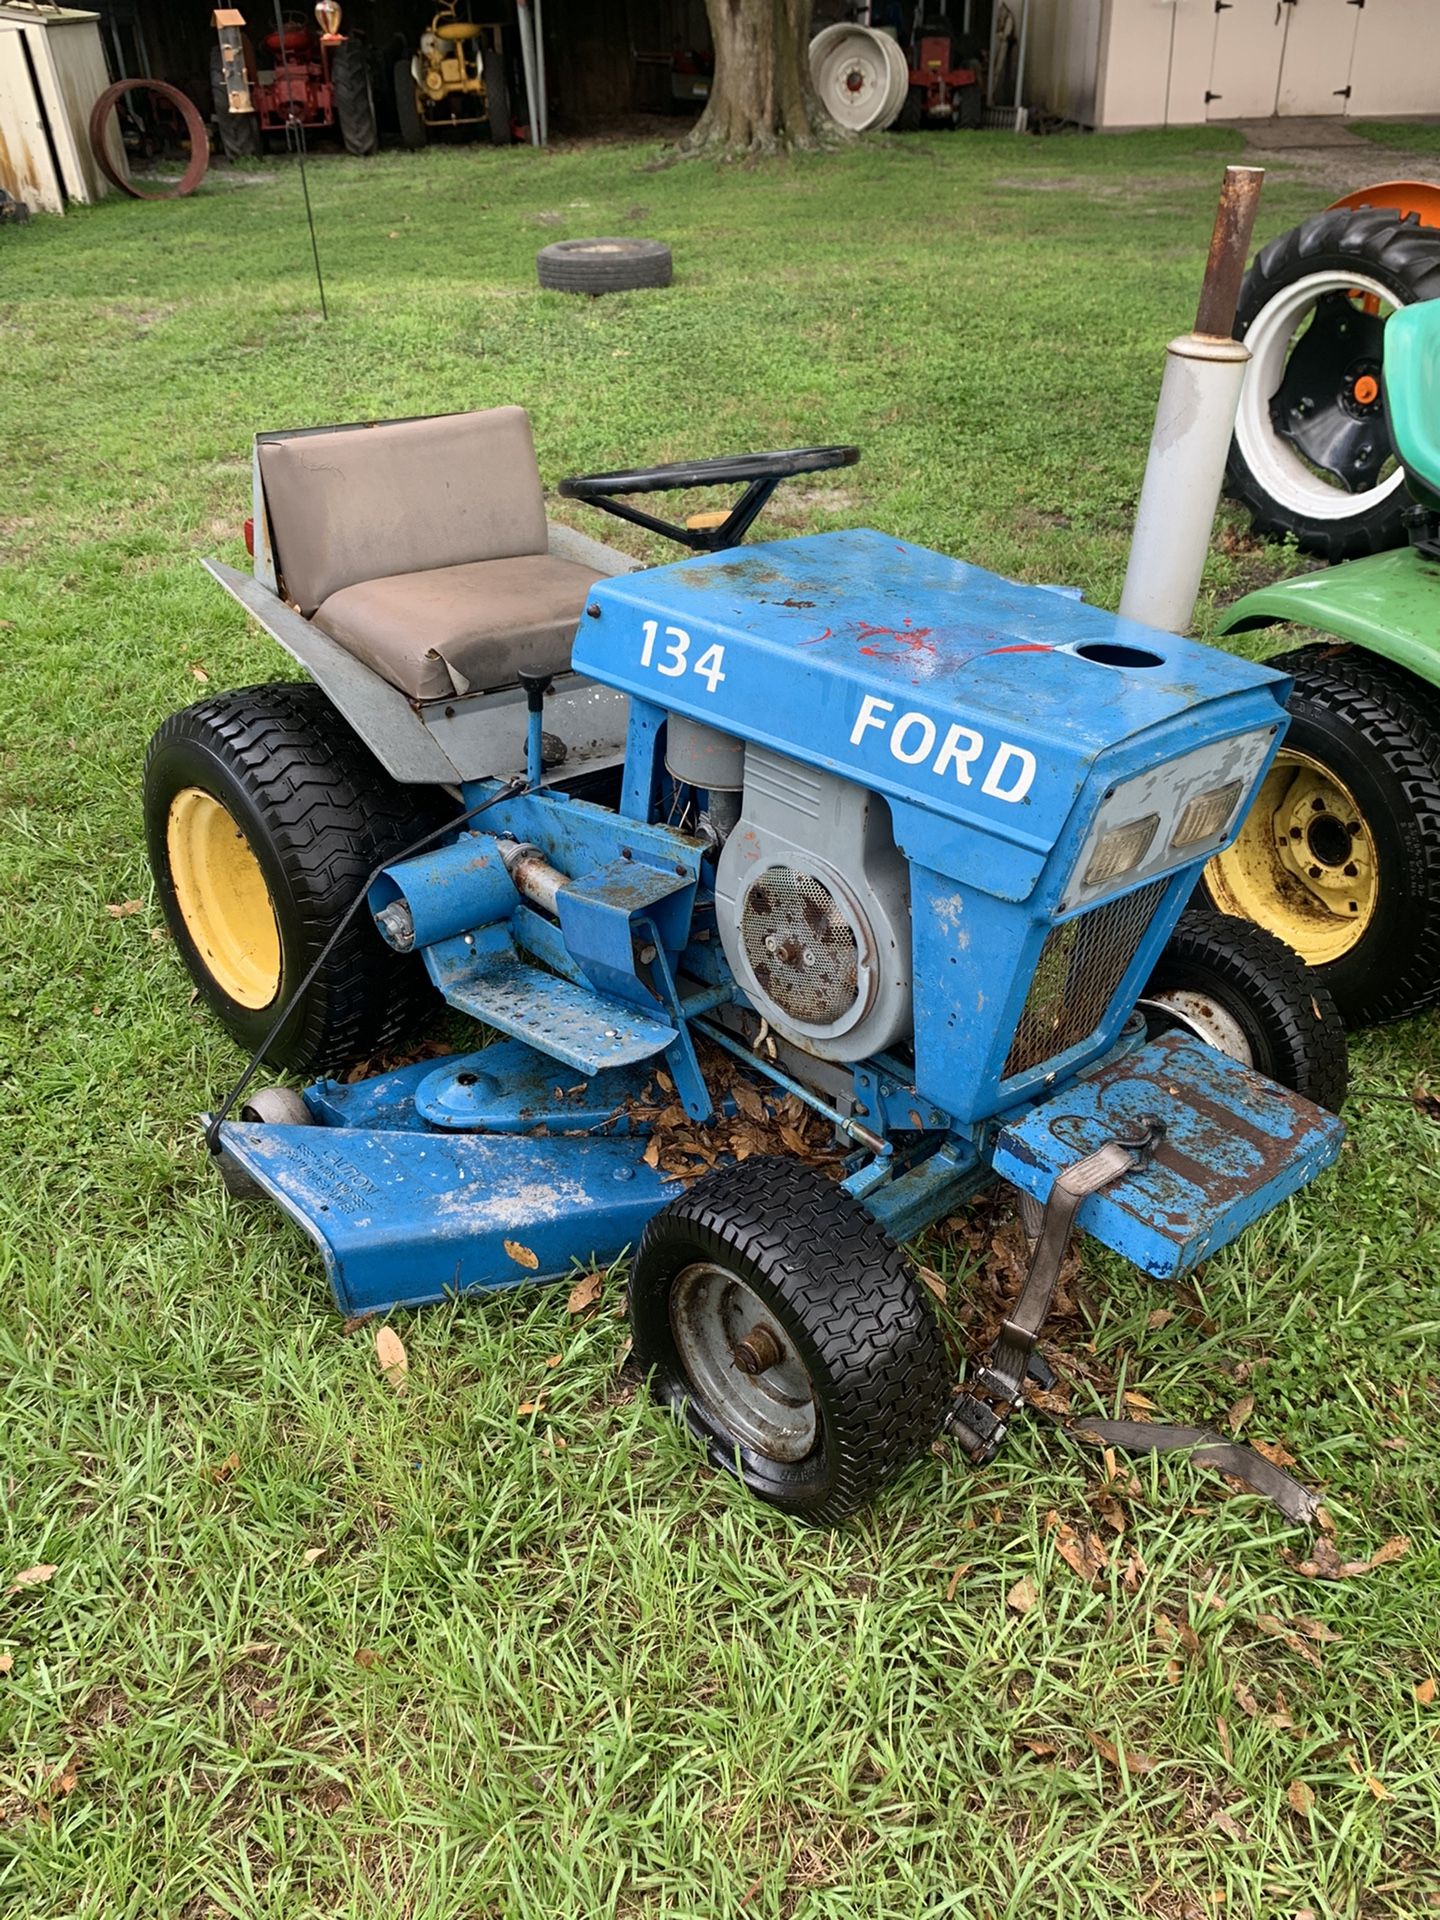 Ford lawn tractor